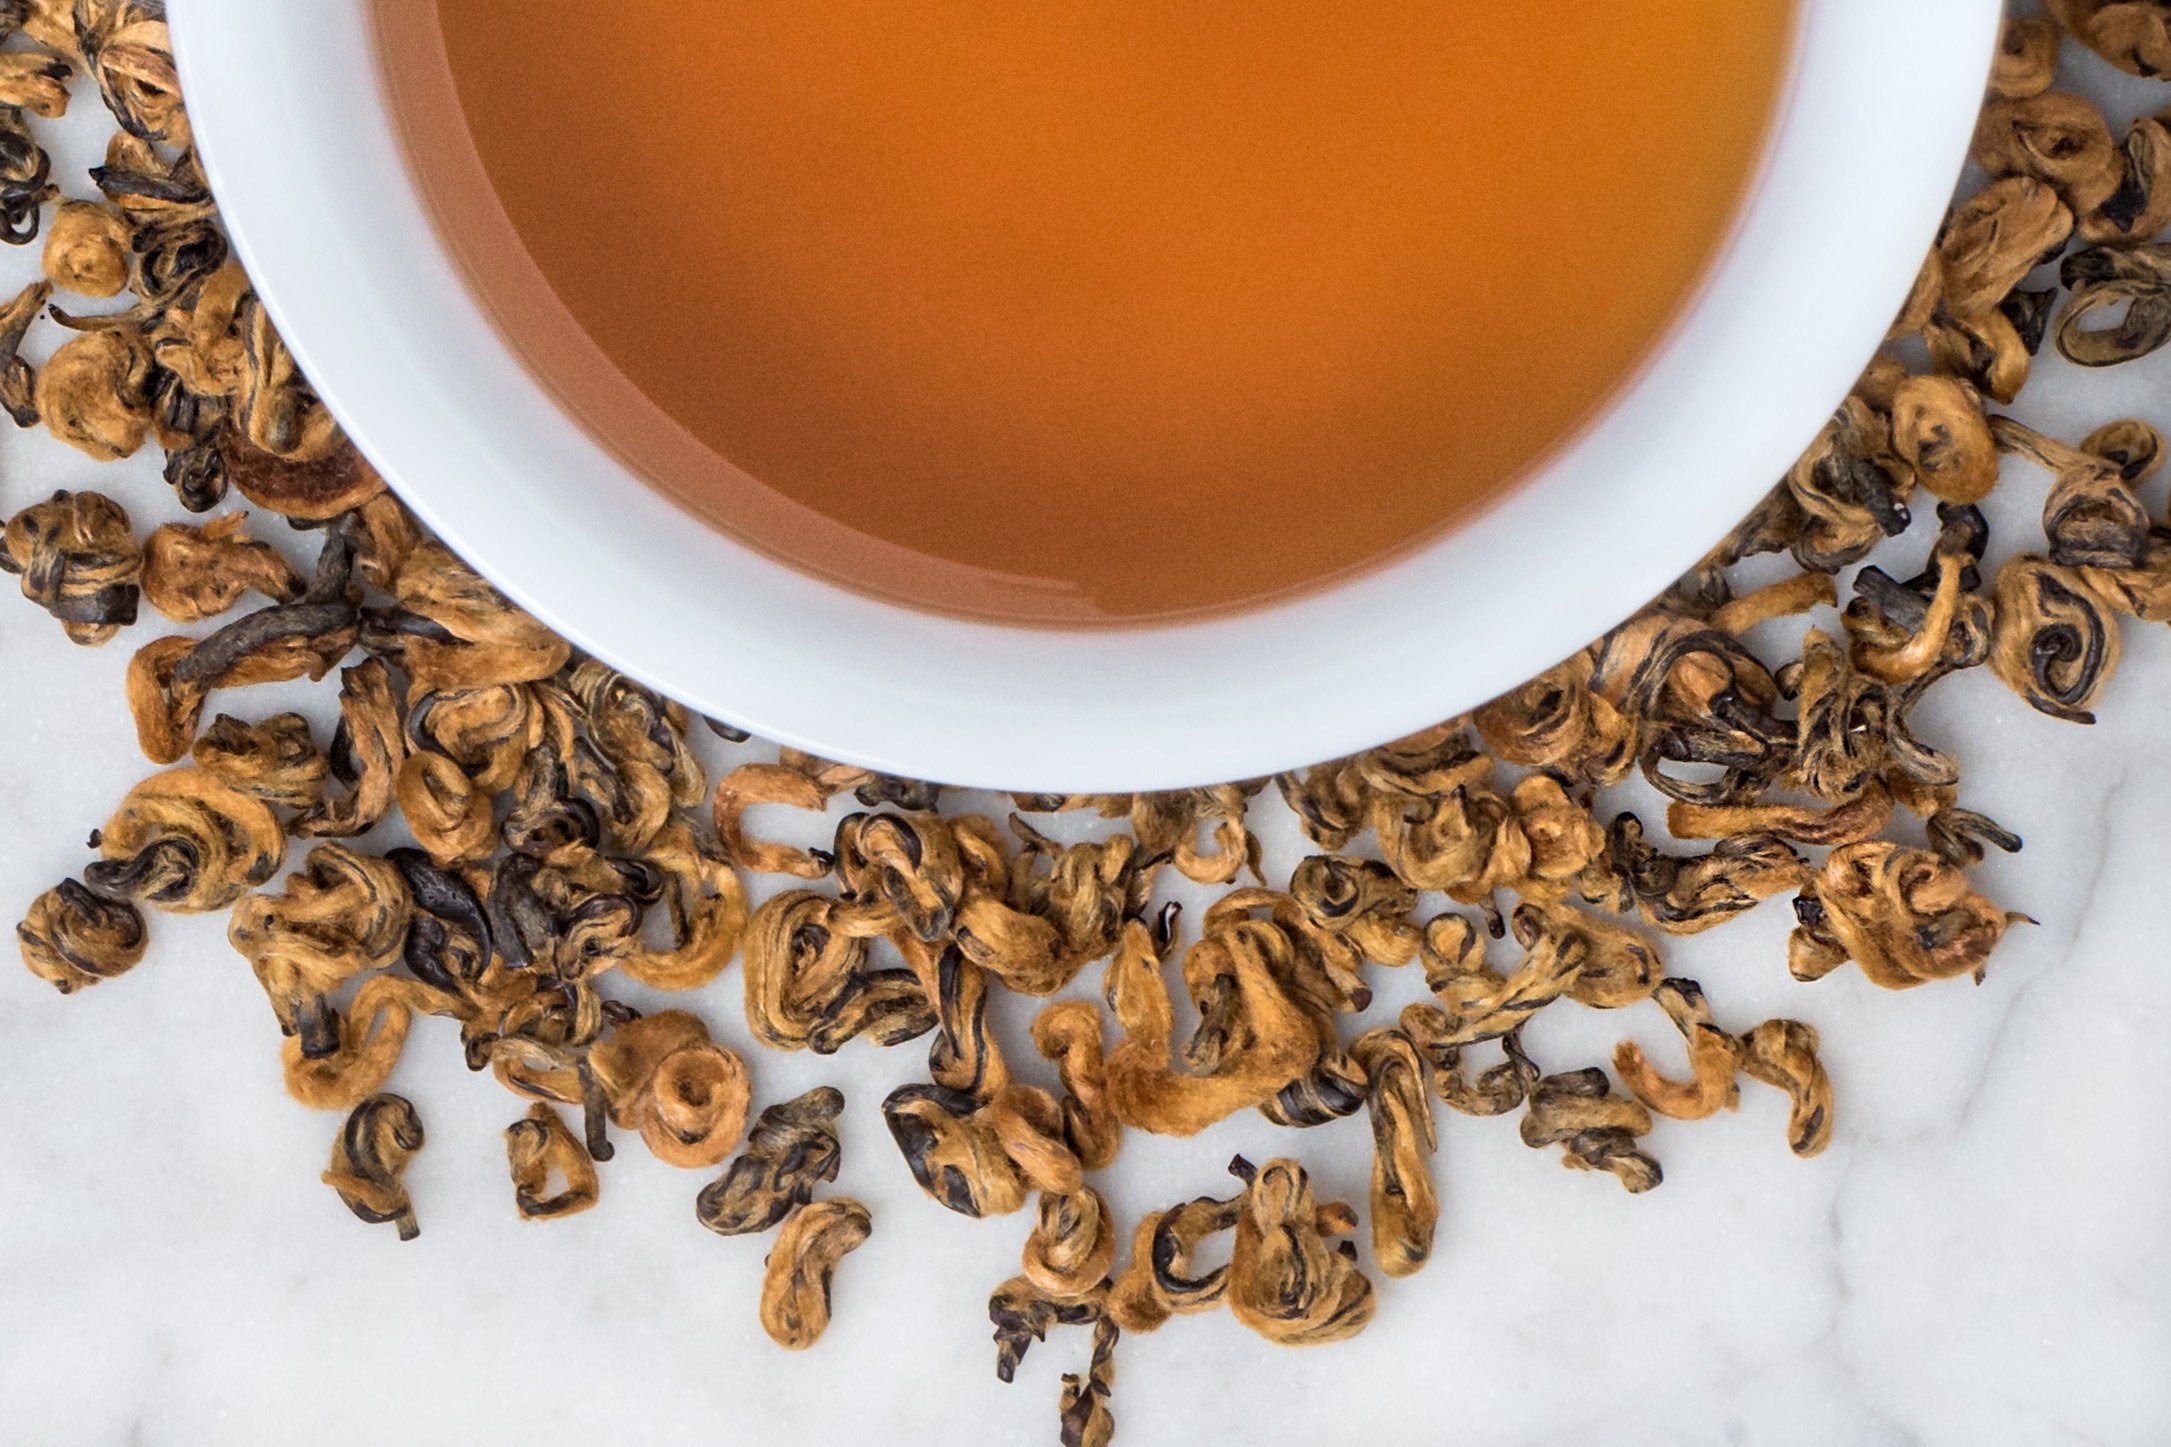 Rolled Gold Black Butterly Tea, Jin Die, Surrounding A Brewed Burnt Orange Cup